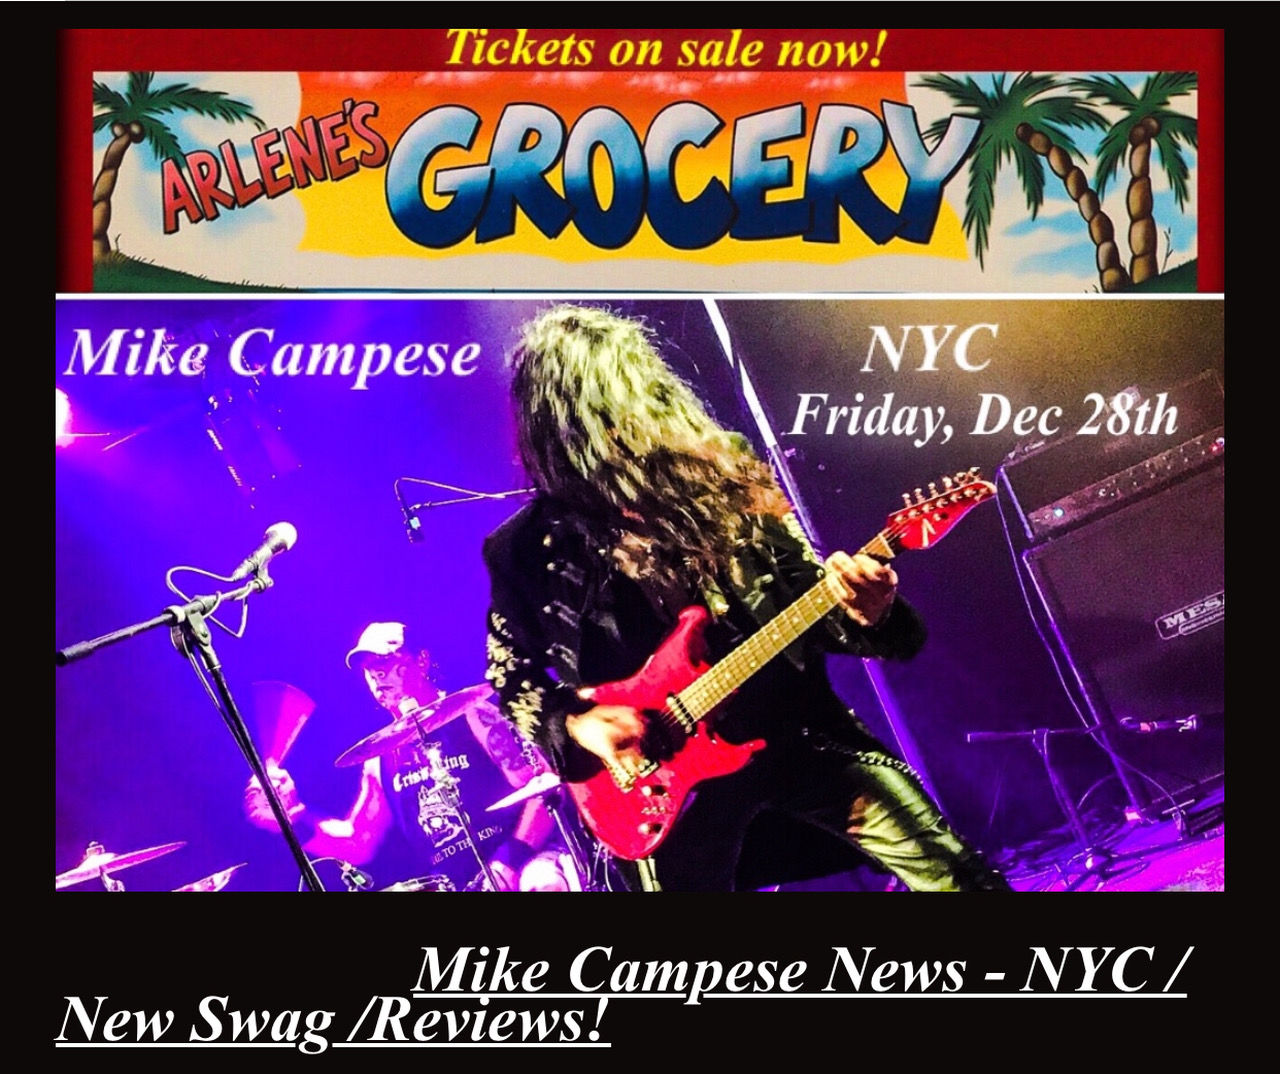 Mike Campese Latest News Flyer, NYC show.